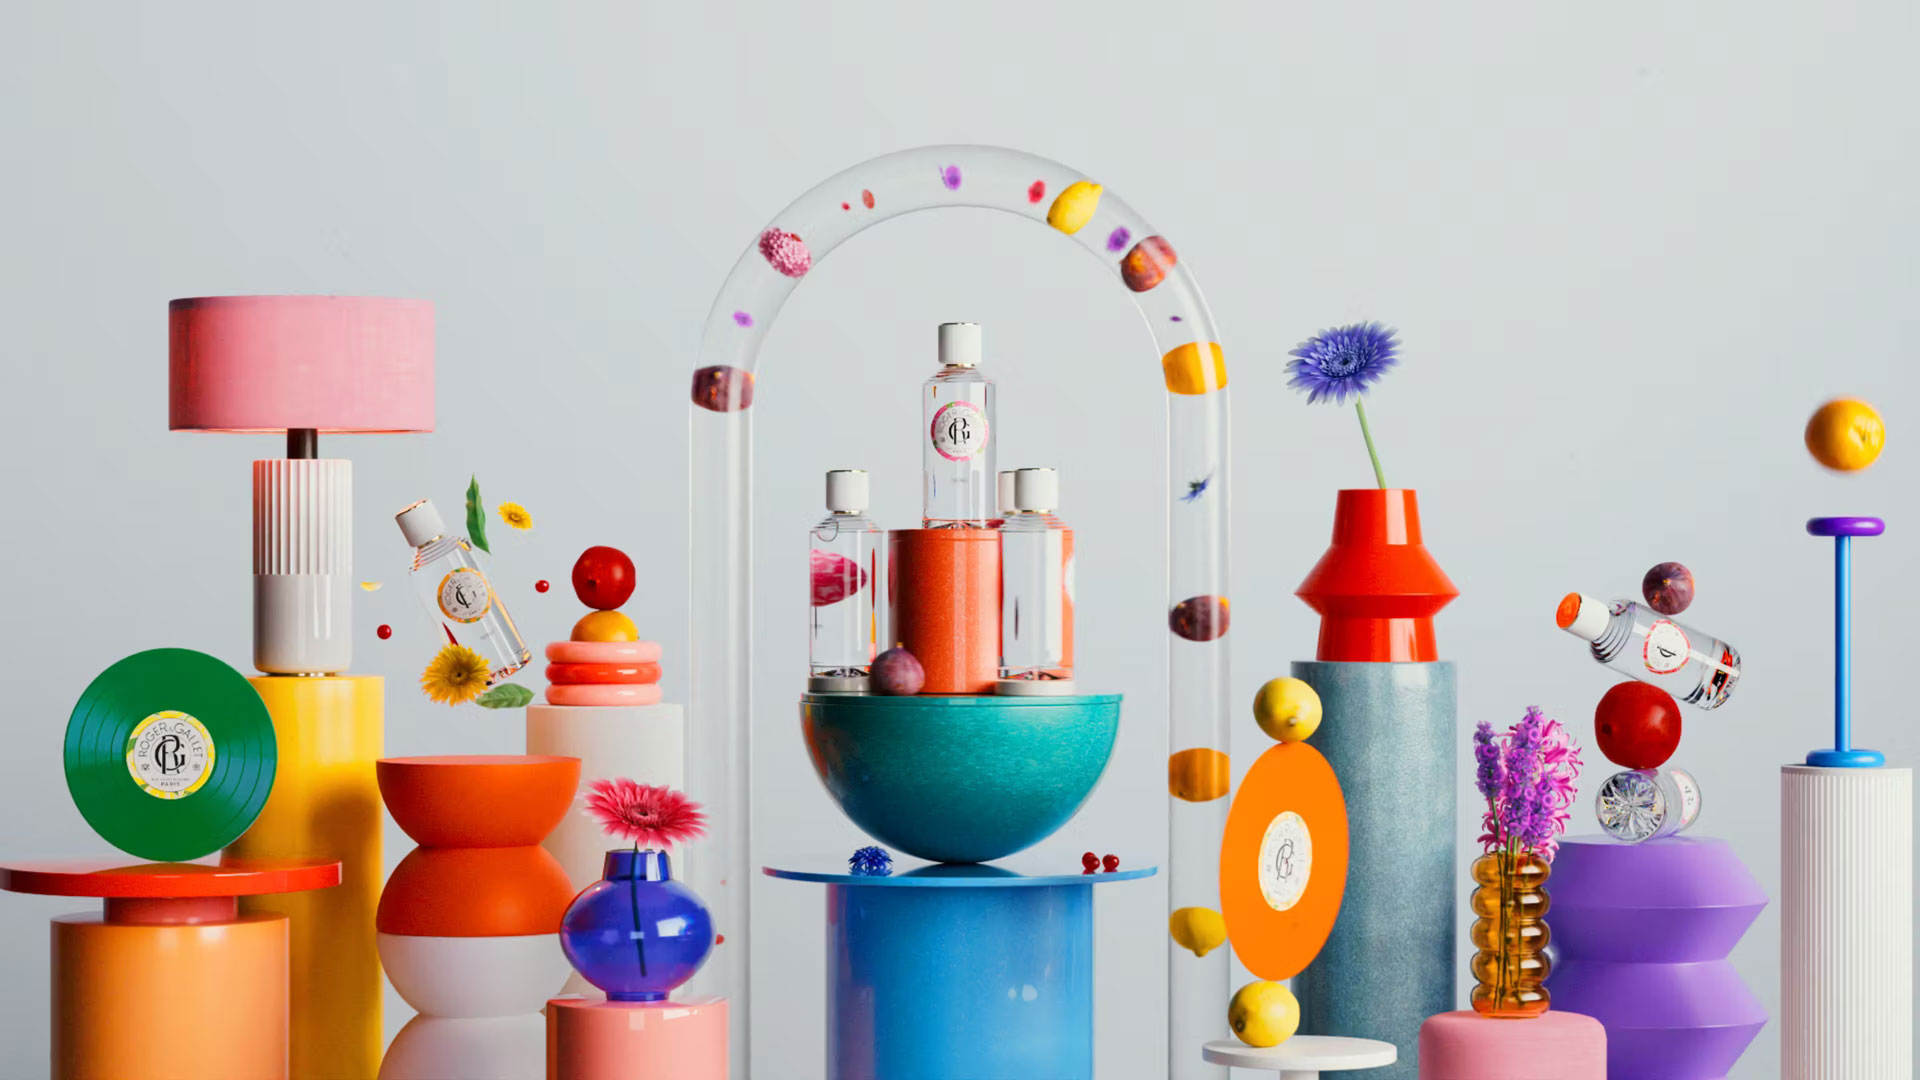 Sophisticated Happiness: Clim Studio for Roger & Gallet - Motion design [Video]